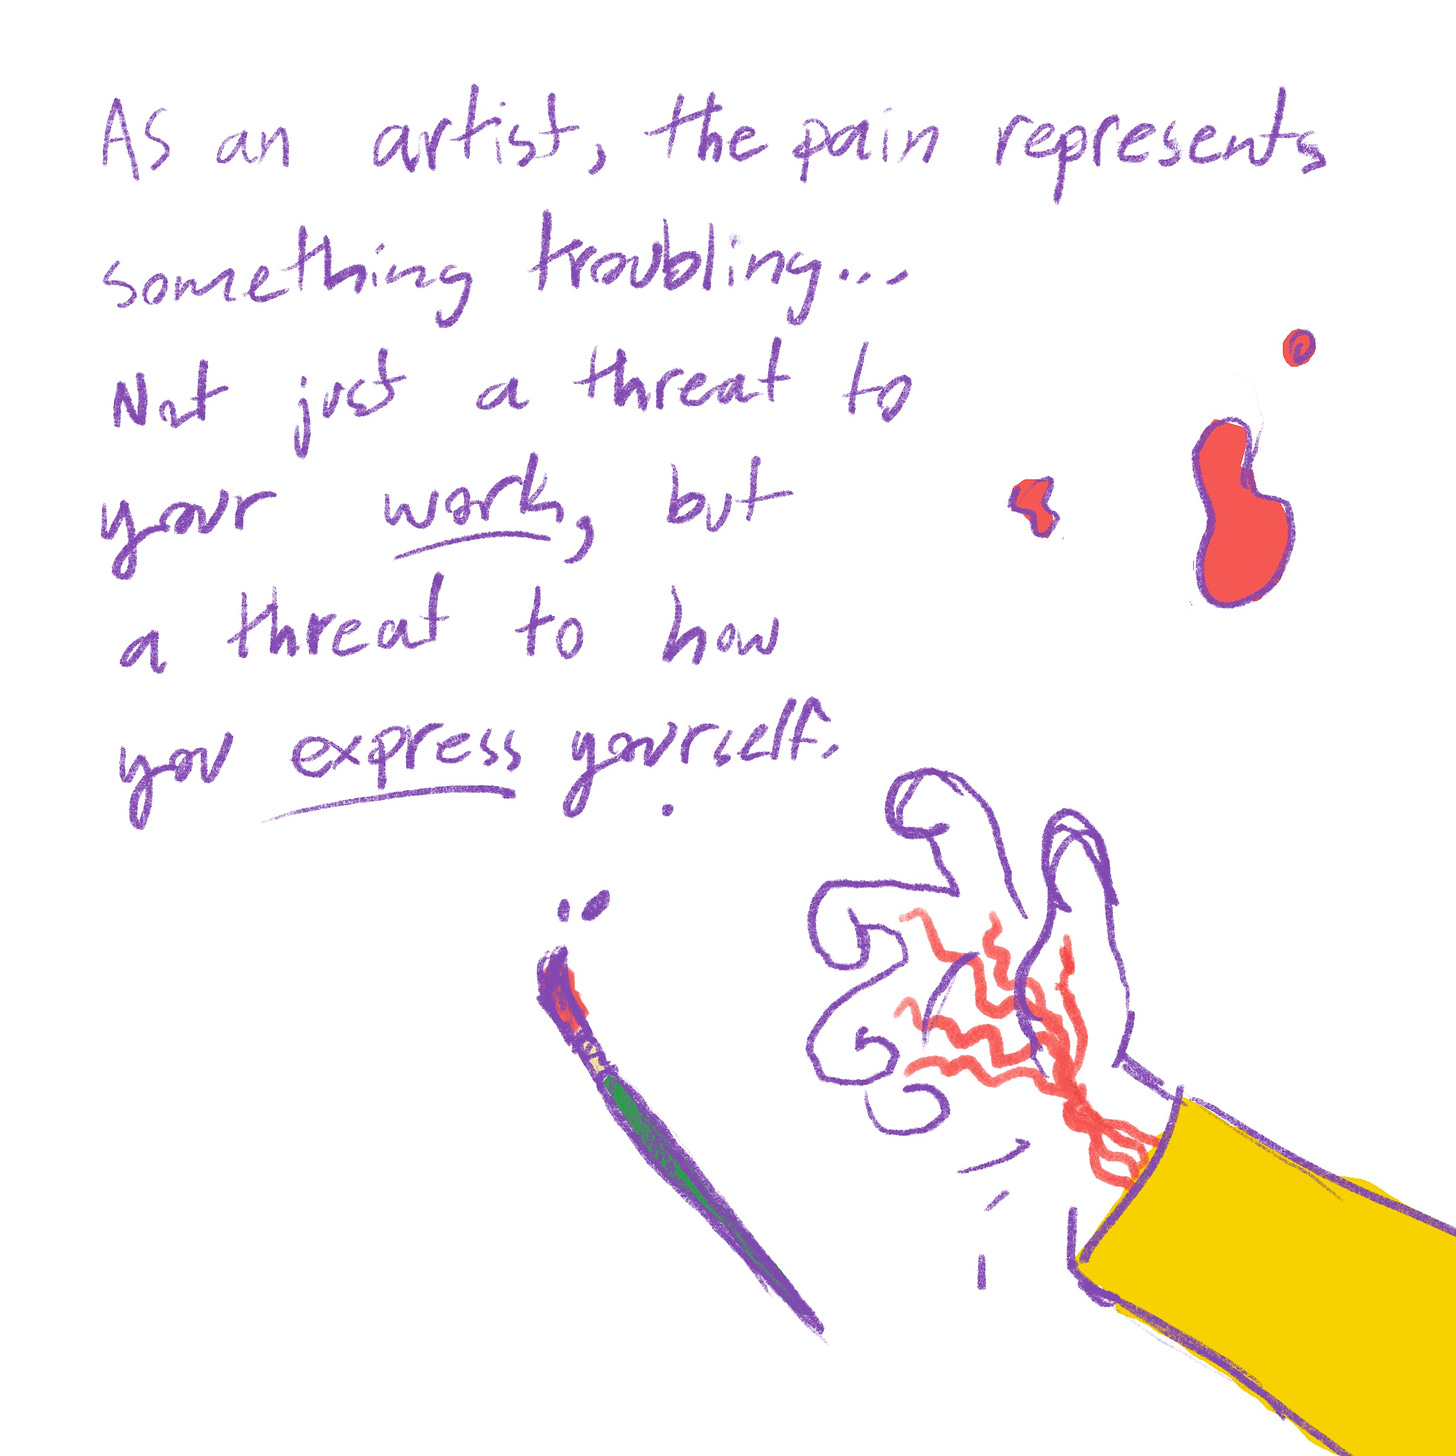 As an artist, the pain represents something troubling... Not just a threat to your work, but a threat to how you express yourself.